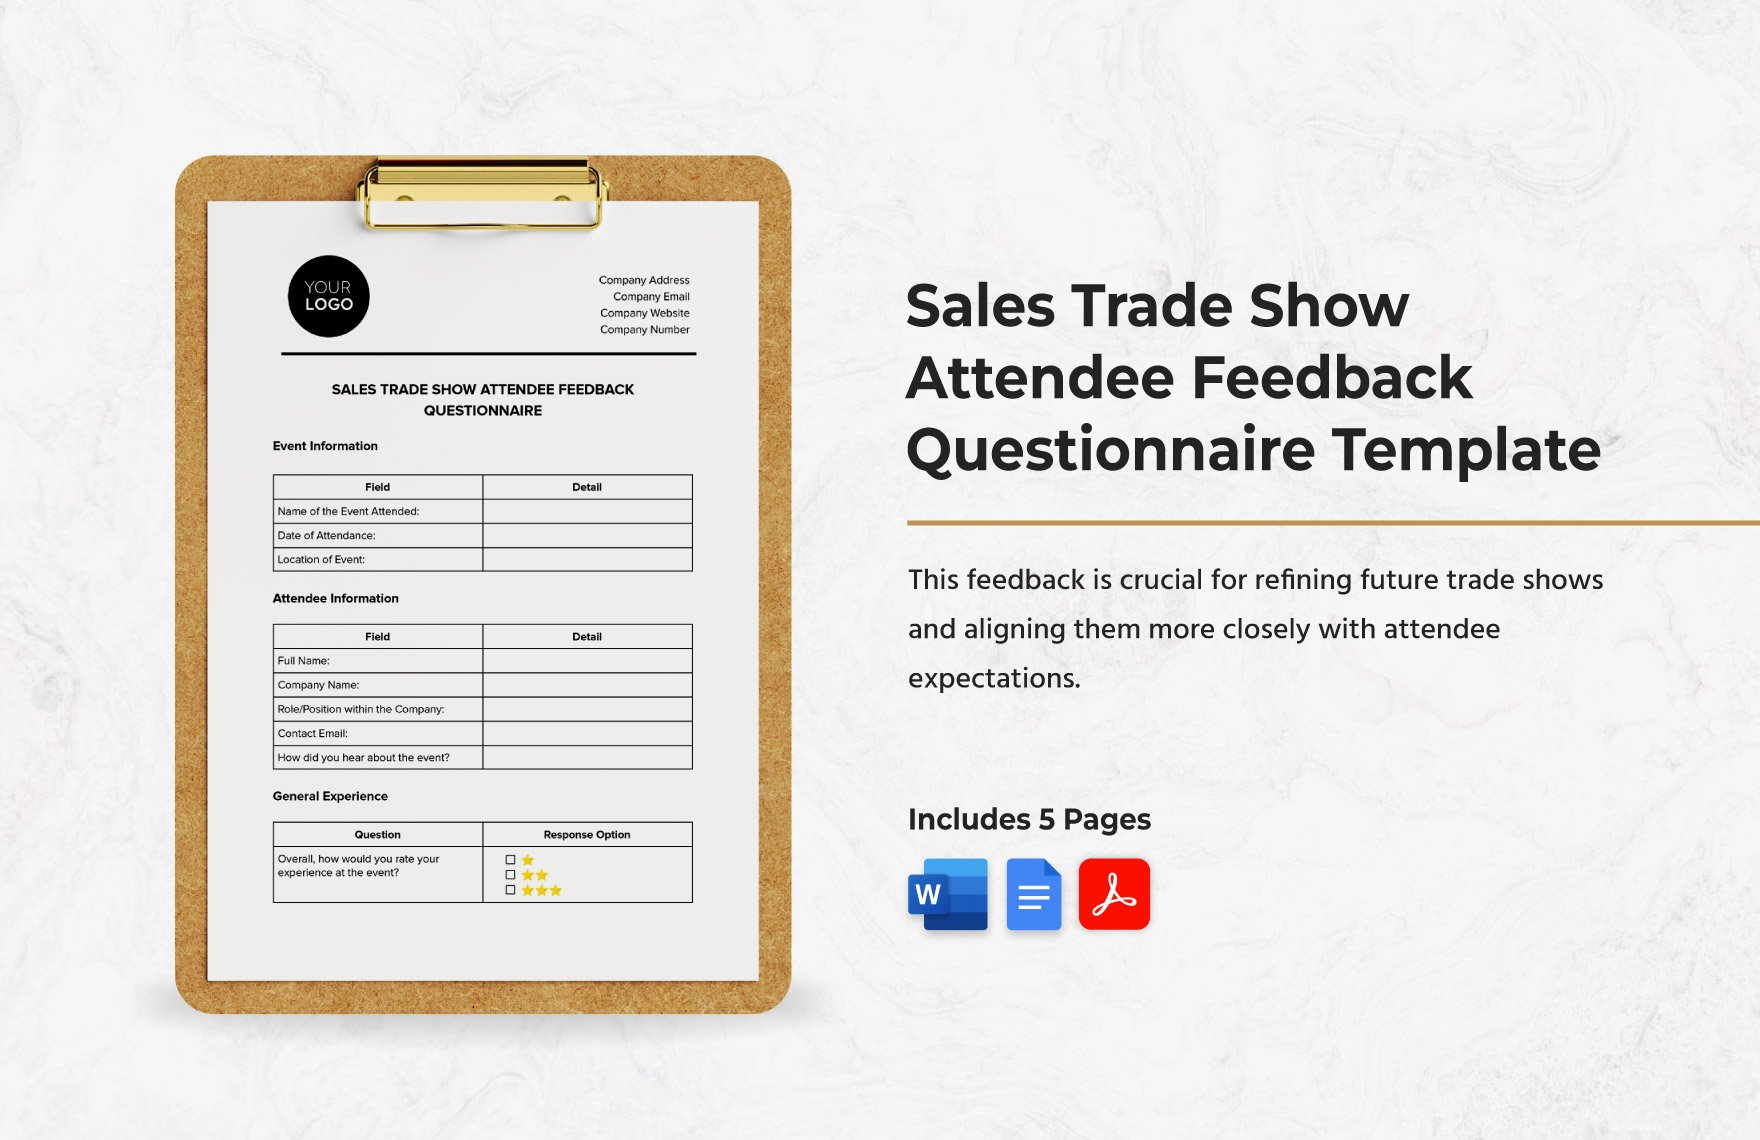 Sales Trade Show Attendee Feedback Questionnaire Template in Word, Google Docs, PDF